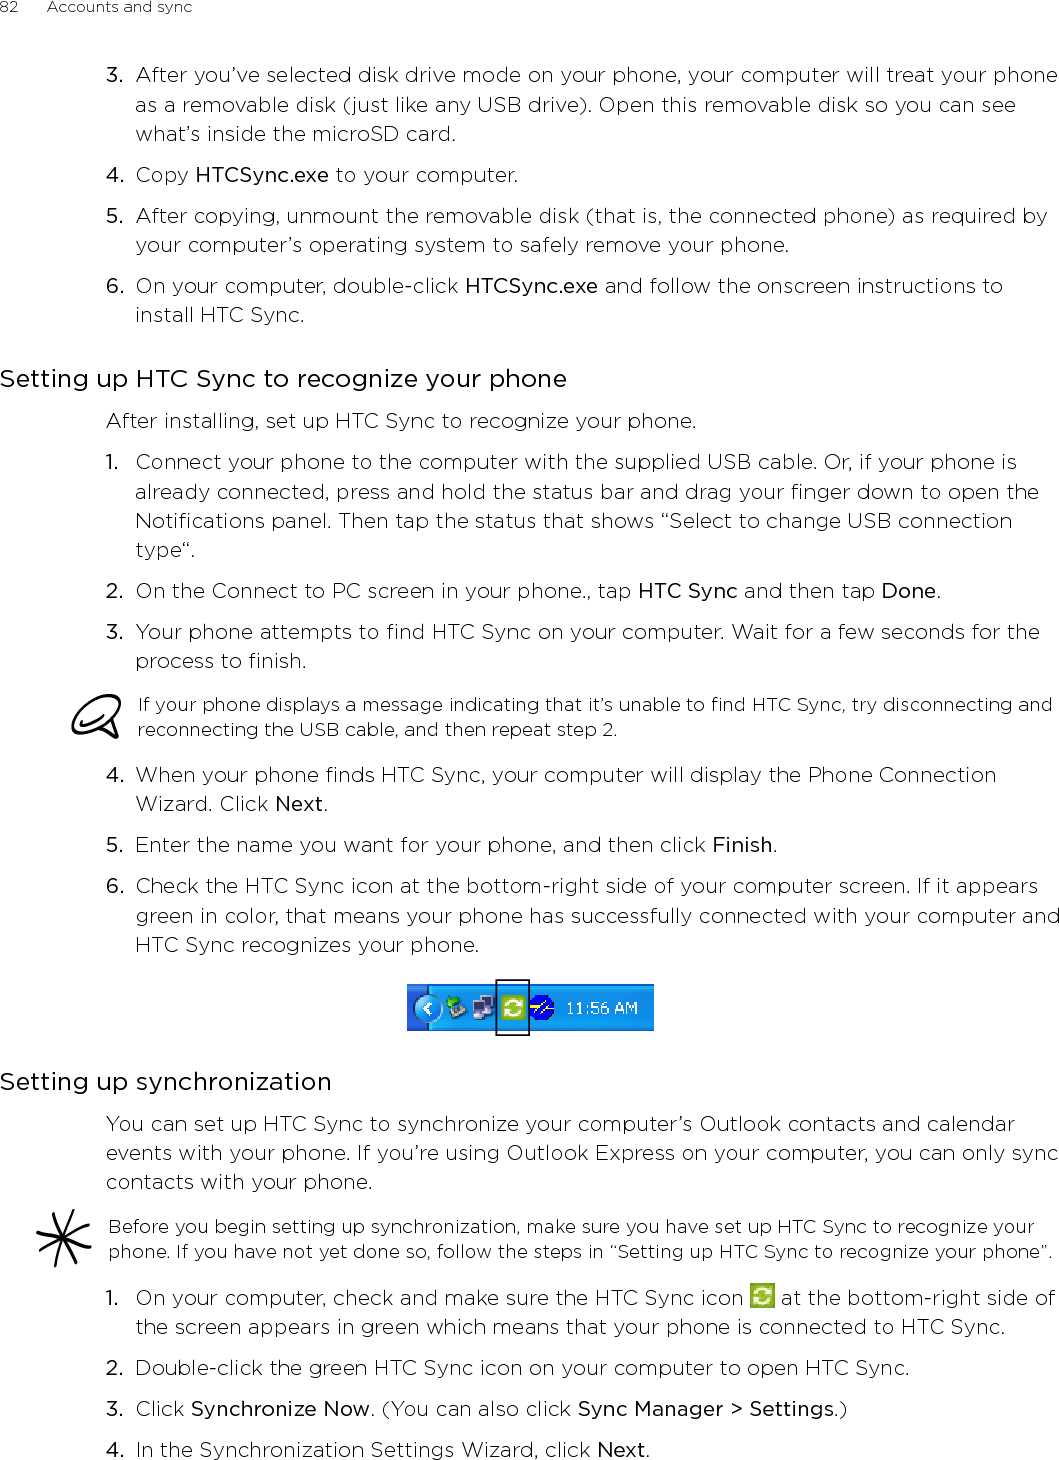 Accounts and sync      835.  In the next few dialog boxes, choose whether to sync Outlook or Outlook Express, select the type of information to sync (contacts and/or calendar), and choose to sync them automatically or manually with your phone.6.  Click Finish.HTC Sync then starts to sync your phone and your computer. Wait for the synchronization to finish.7.  A summary report is then displayed. Click Close.Setting up more sync optionsHTC Sync gives you the flexibility to set many options, such as setting a sync schedule, choosing how to resolve conflicts when the same items are found on both the phone and the computer, and more.1.  On your computer, check and make sure the HTC Sync icon   at the bottom-right side of the screen appears in green which means that your phone is connected to HTC Sync.2.  If HTC Sync is not open, double-click the green HTC Sync icon to open it.3.  Click Sync Manager &gt; Settings.4.  In the Synchronization Settings Wizard dialog box, click Manual settings.5.  From the left side of the Sync Manager Settings dialog box, click the type of setting you want to change, and then choose from the available options on the right. Settings that can be changed include the following:Contacts or Calendar folder to sync withChange this only if you have personal folders created in your Outlook and you need to sync with a personal folder. Click Contacts or Calendar on the left side of the dialog box, click the Properties button, and then choose the personal folder to sync with.Calendar events to sync withChoose the number of days of calendar events to sync. Click Calendar on the left side of the dialog box, click Properties, and then set the days under Date range.Conflict policyIn cases when the same contacts and/or calendar items exist in both your phone and your computer, choose whose data you want to keep when a conflict occurs.When to syncClick Automatic sync on the left side of the dialog box. Then choose whether to sync manually, auto sync everytime you connect your phone to your computer, or sync at a set schedule.6.  Click Apply to save the sync options you’ve selected, and then click OK.